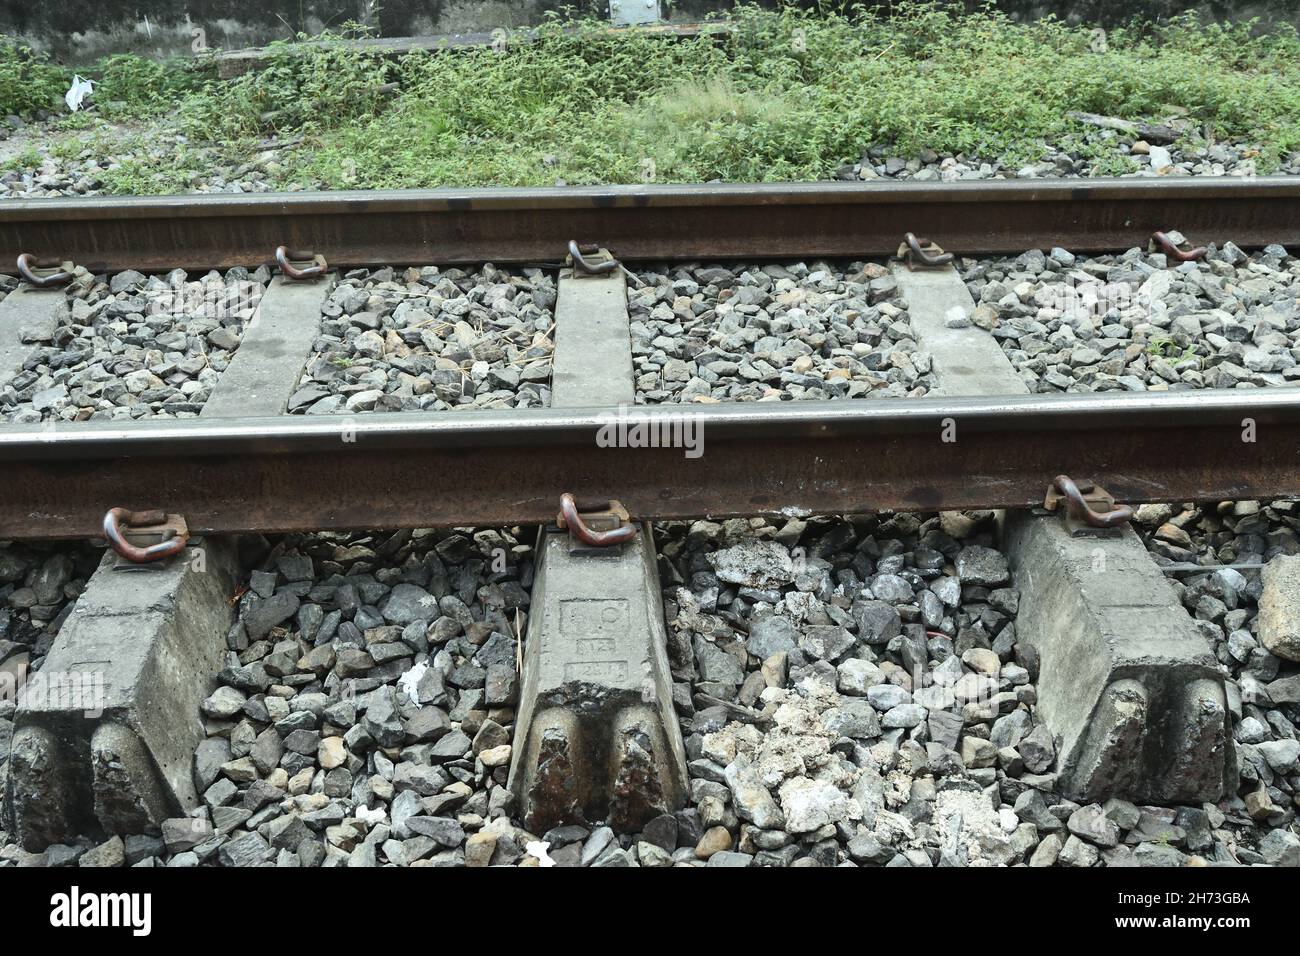 Railway in Thailand, Metal rails on concrete blocks and piles of stones, Old-style rail transport Stock Photo